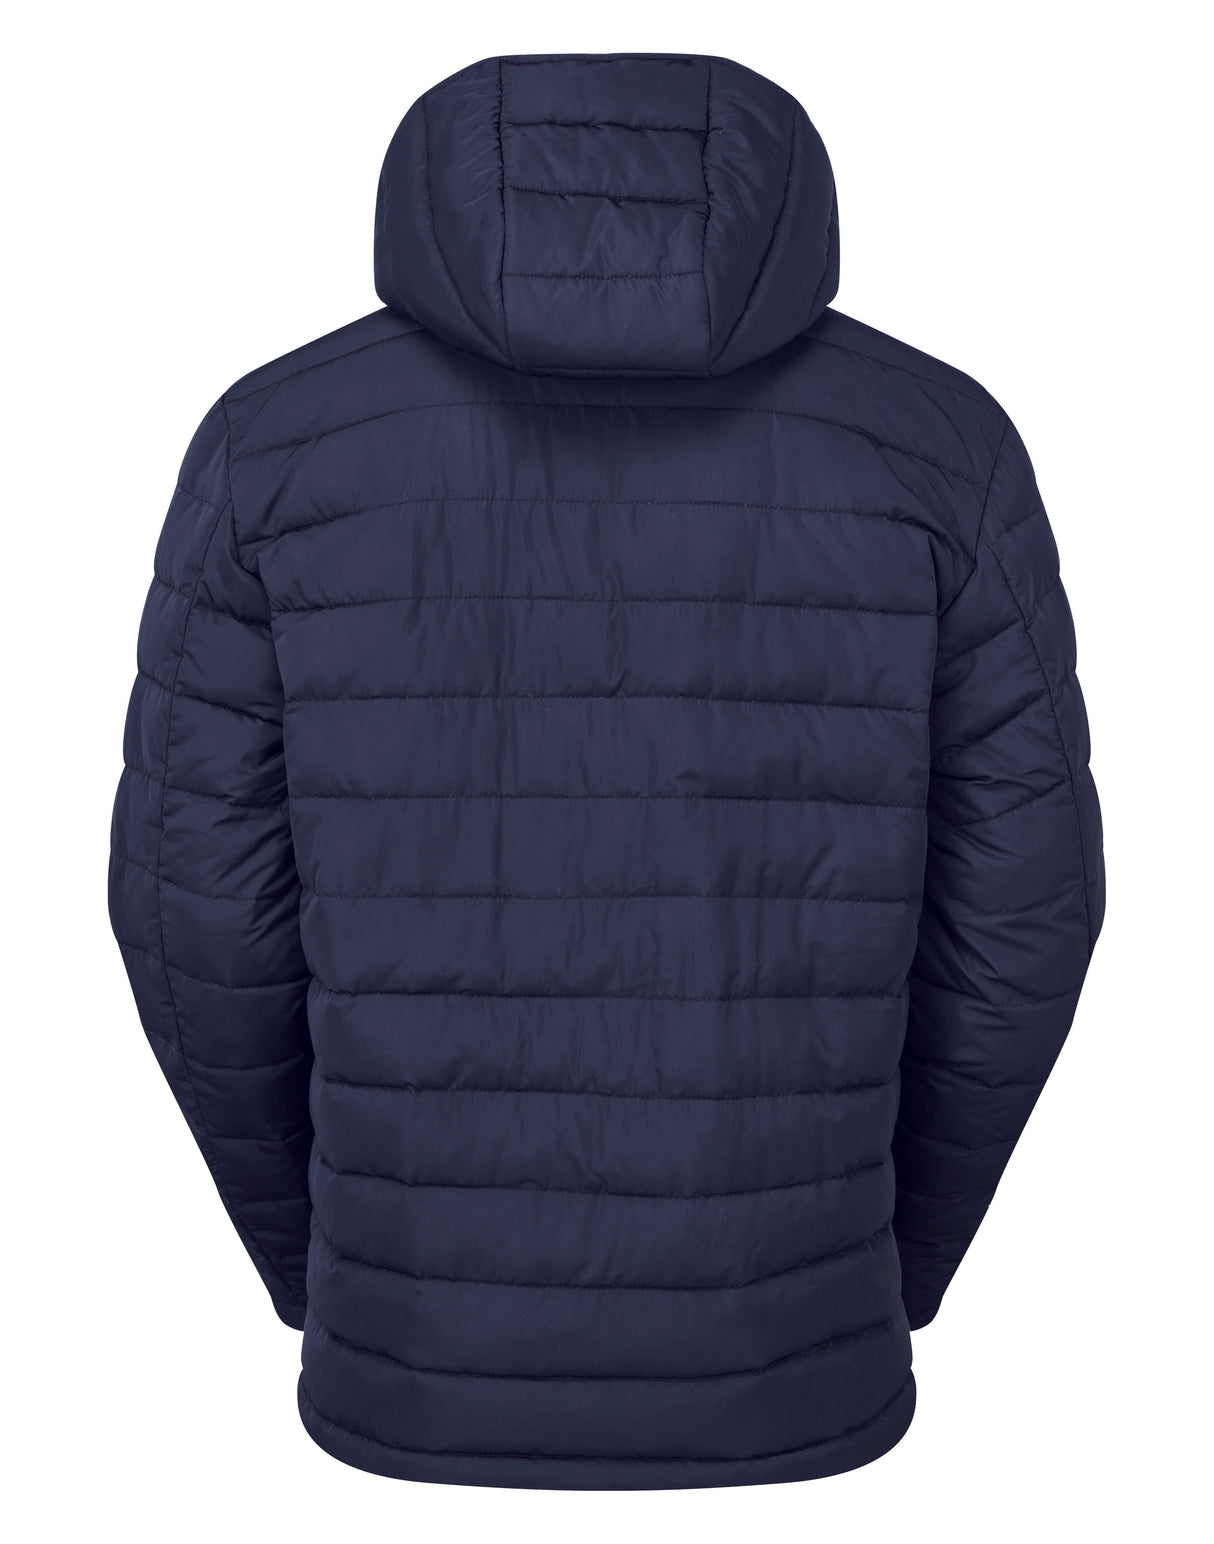 2786 Delmont Recycled Padded Jacket